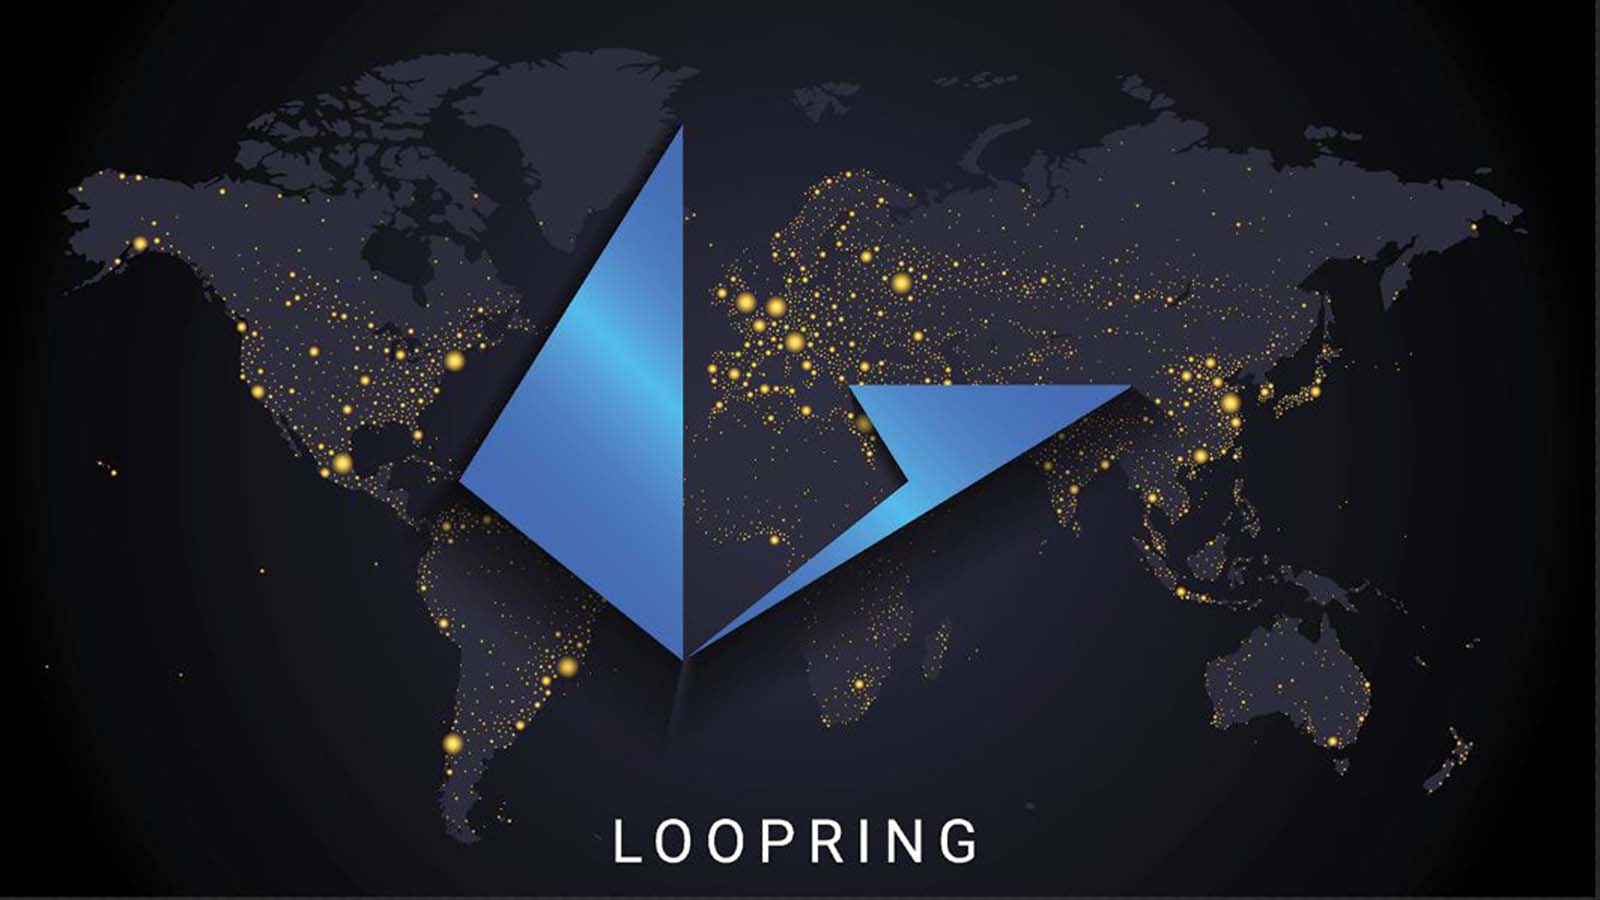 A concept image showing the Loopring (LRC) logo on top of a grey and black world map representing price predictions.